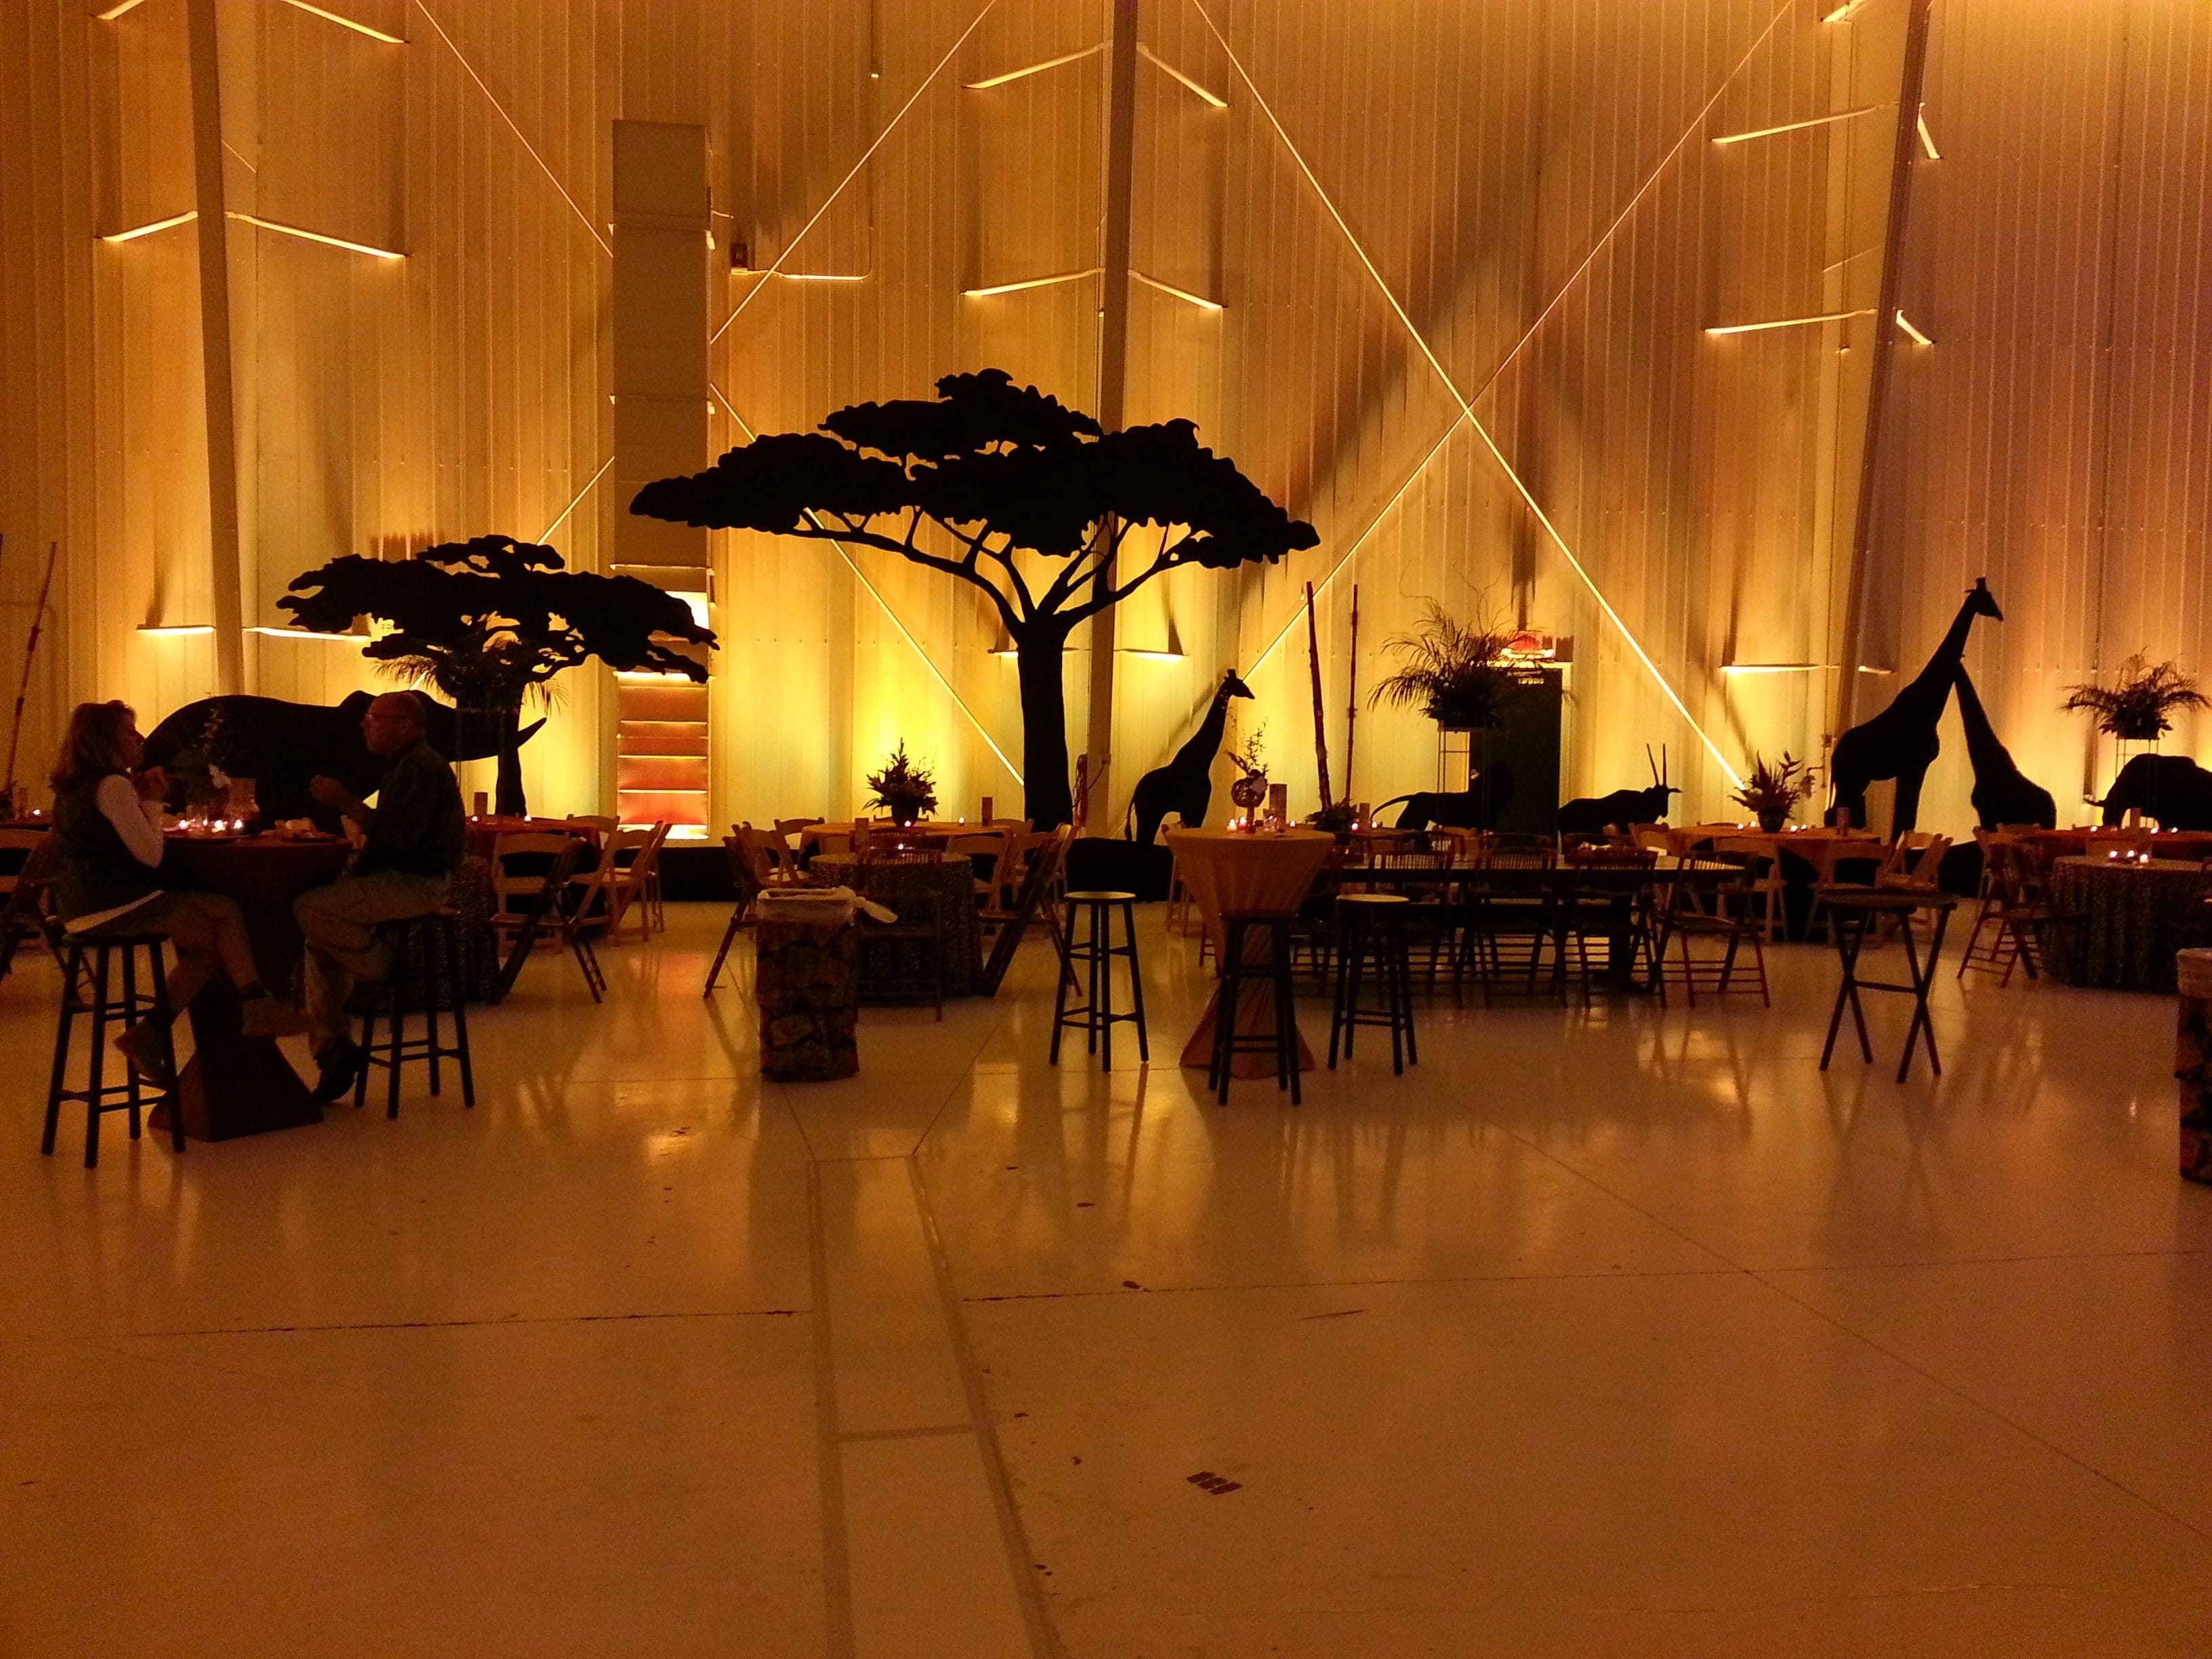 African Sahara themed party in an airport hanger. Decor by Event Lab, Lighting by Duluth Event Lighting.